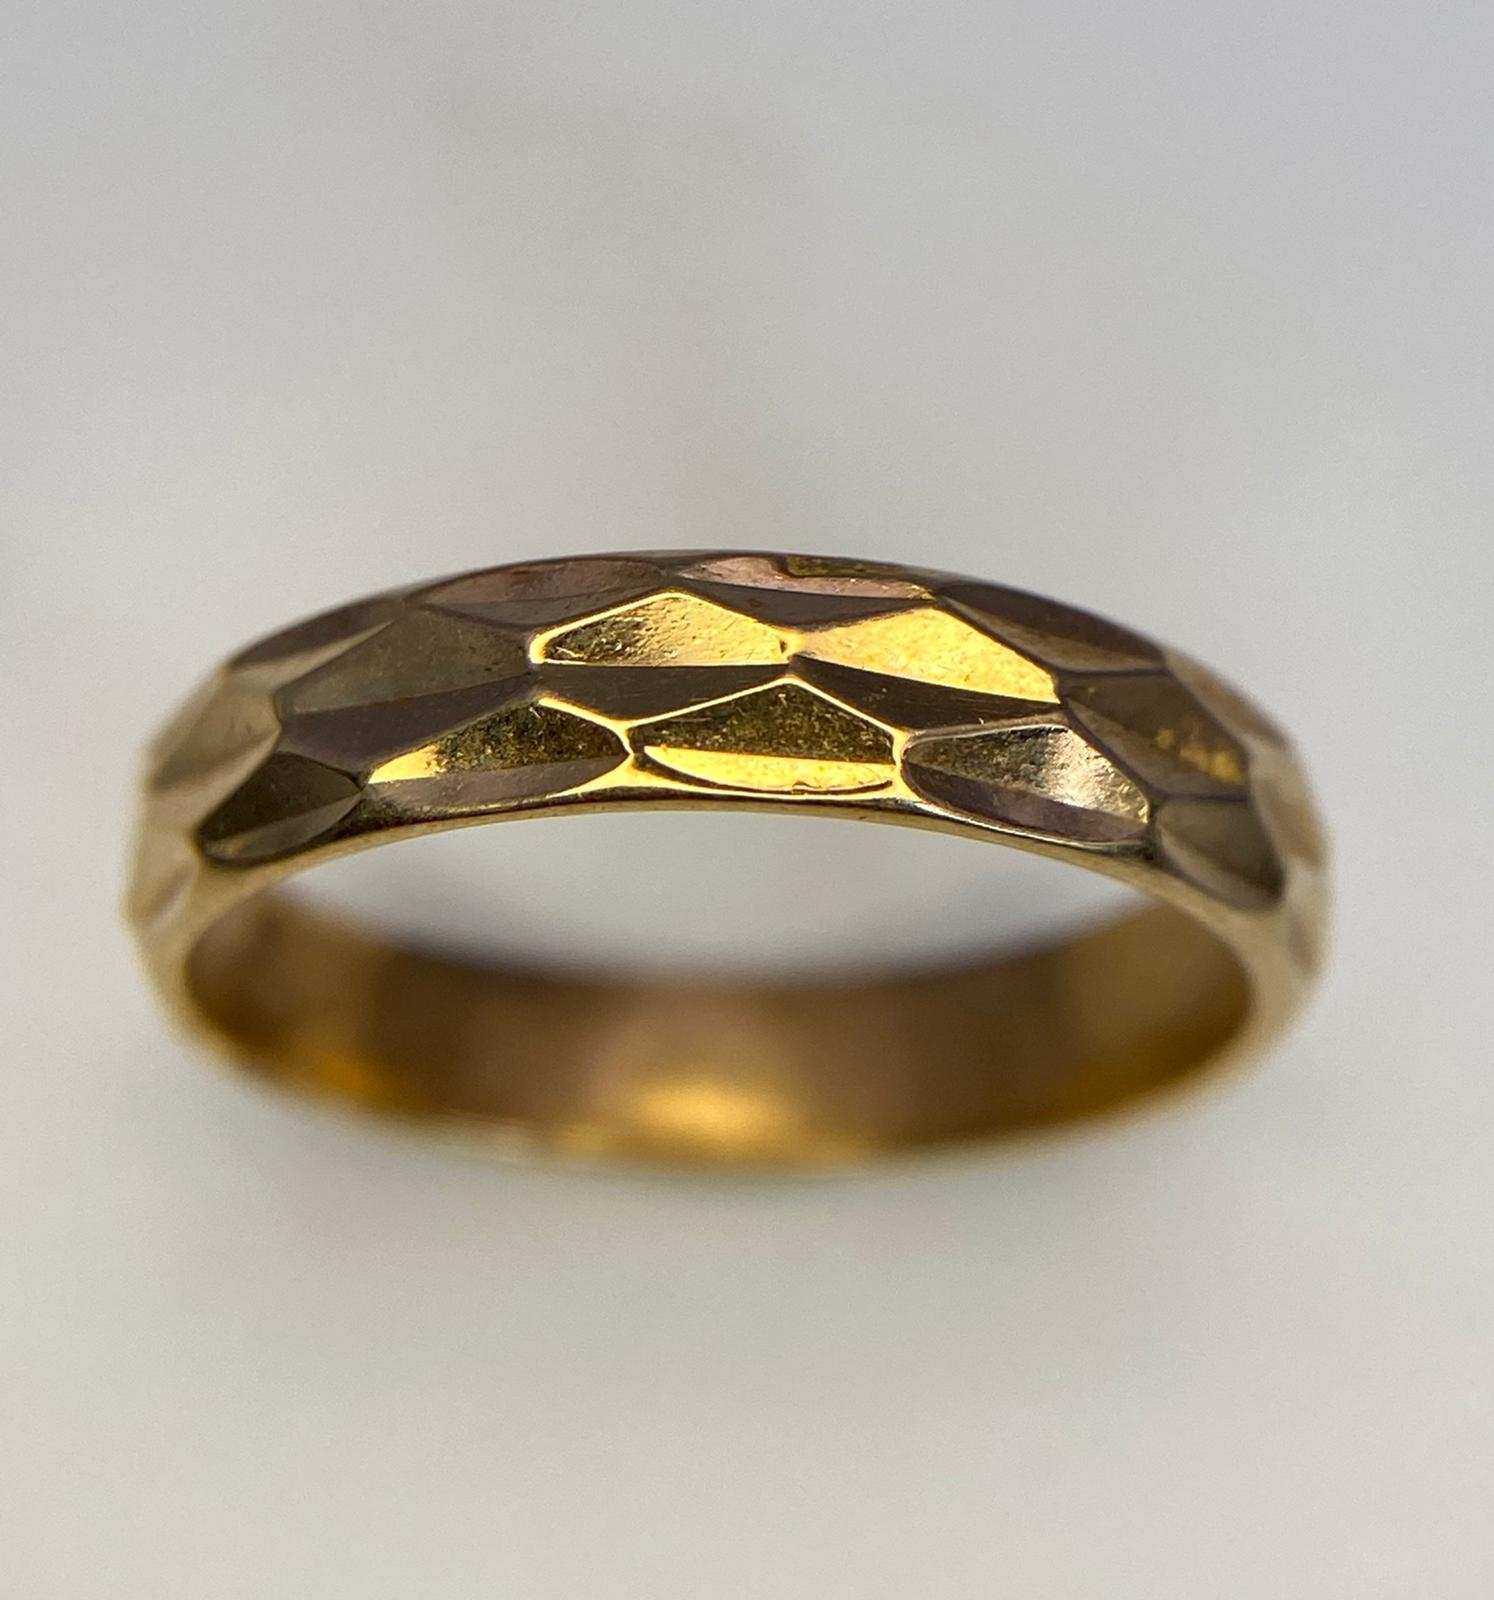 A 9K Yellow Gold Faceted Band Ring. Size M. 2.9g weight.